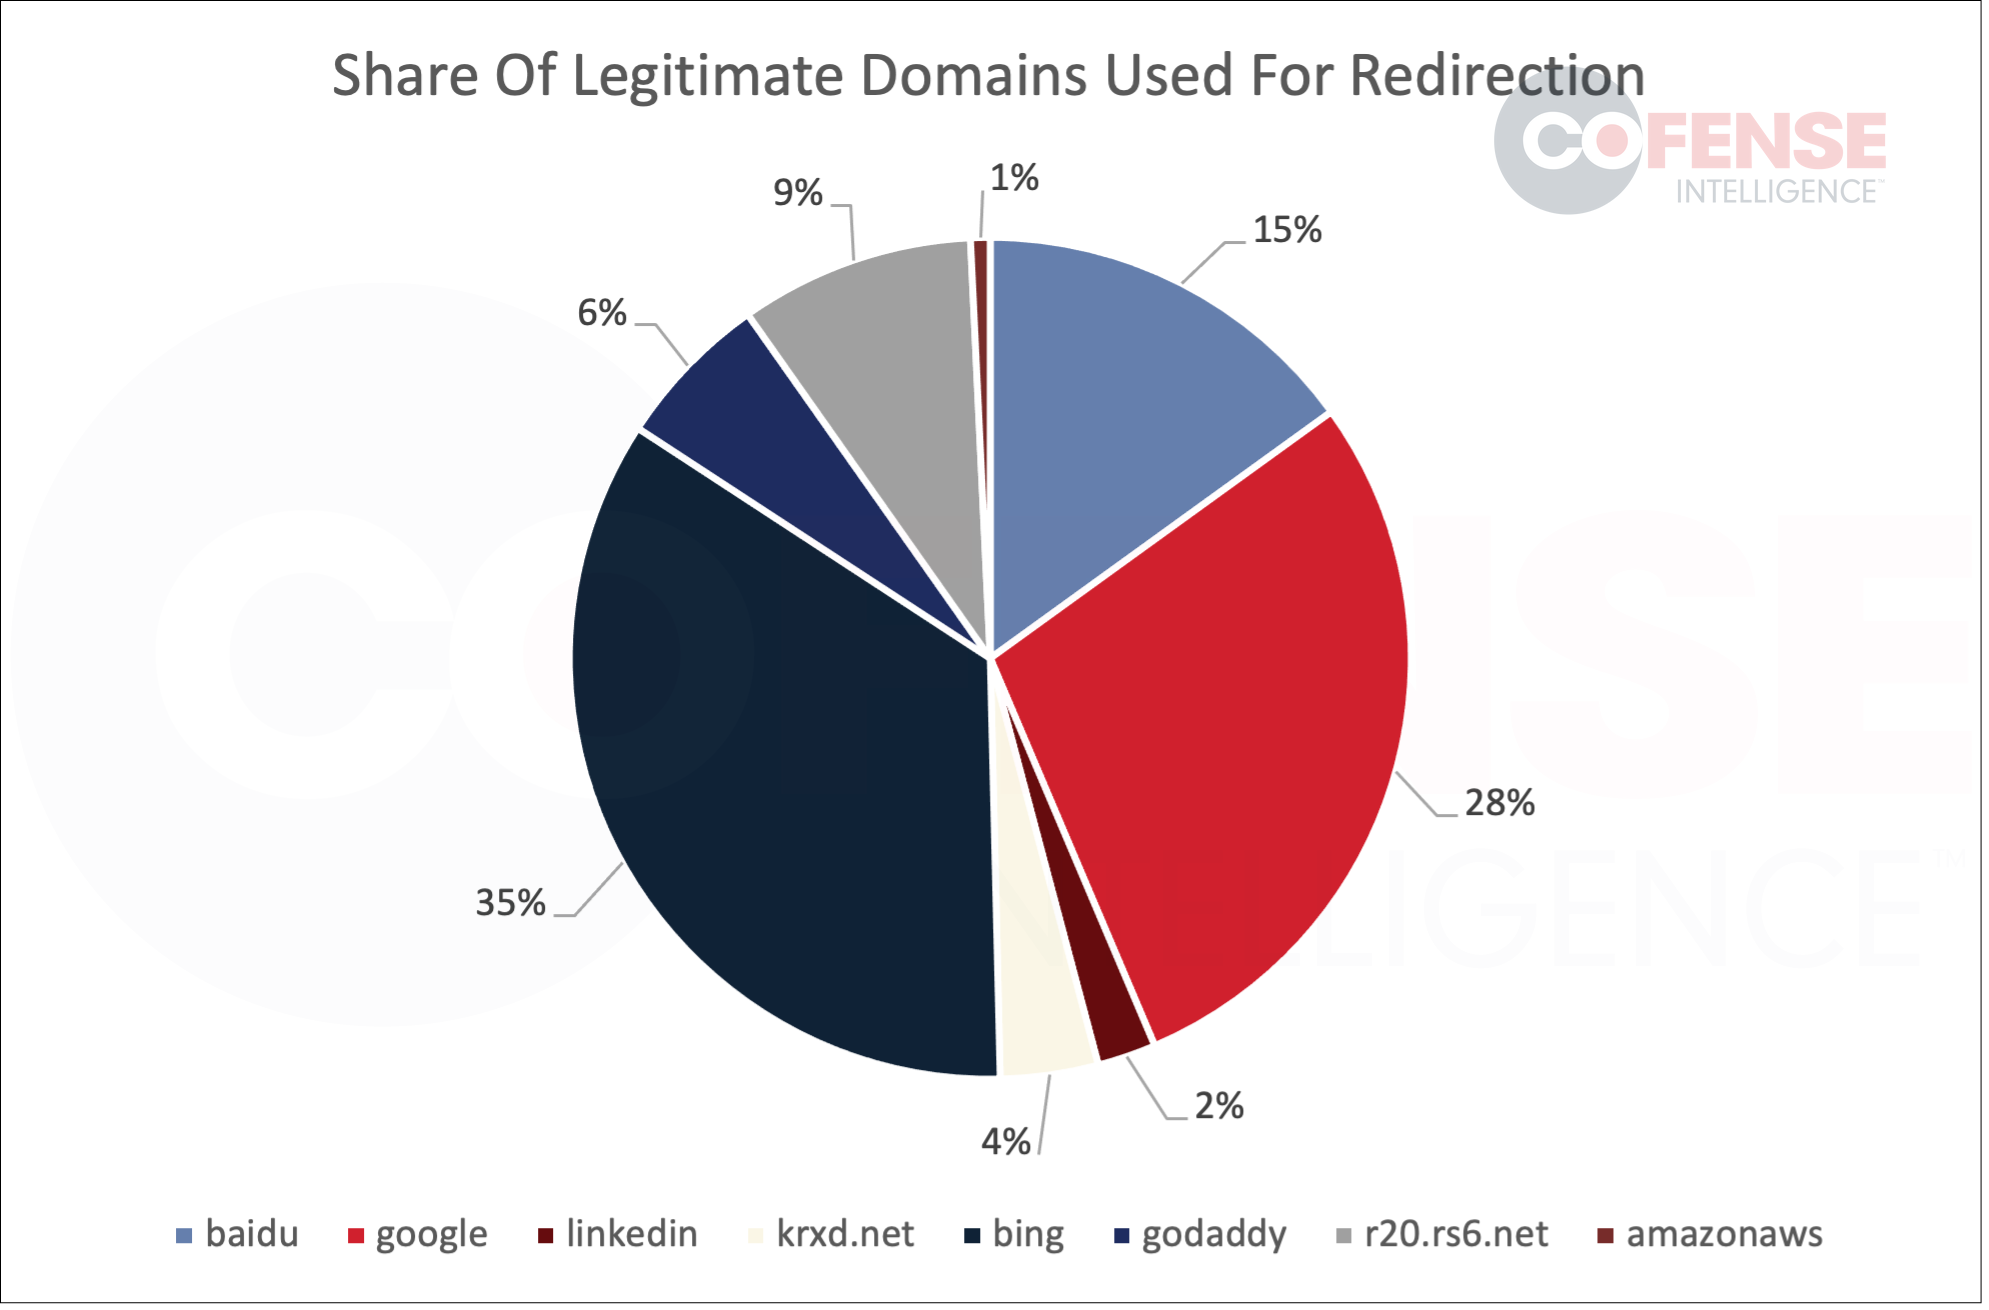 Figure 6: Legitimate domains used for redirection which are embedded in QR codes. 